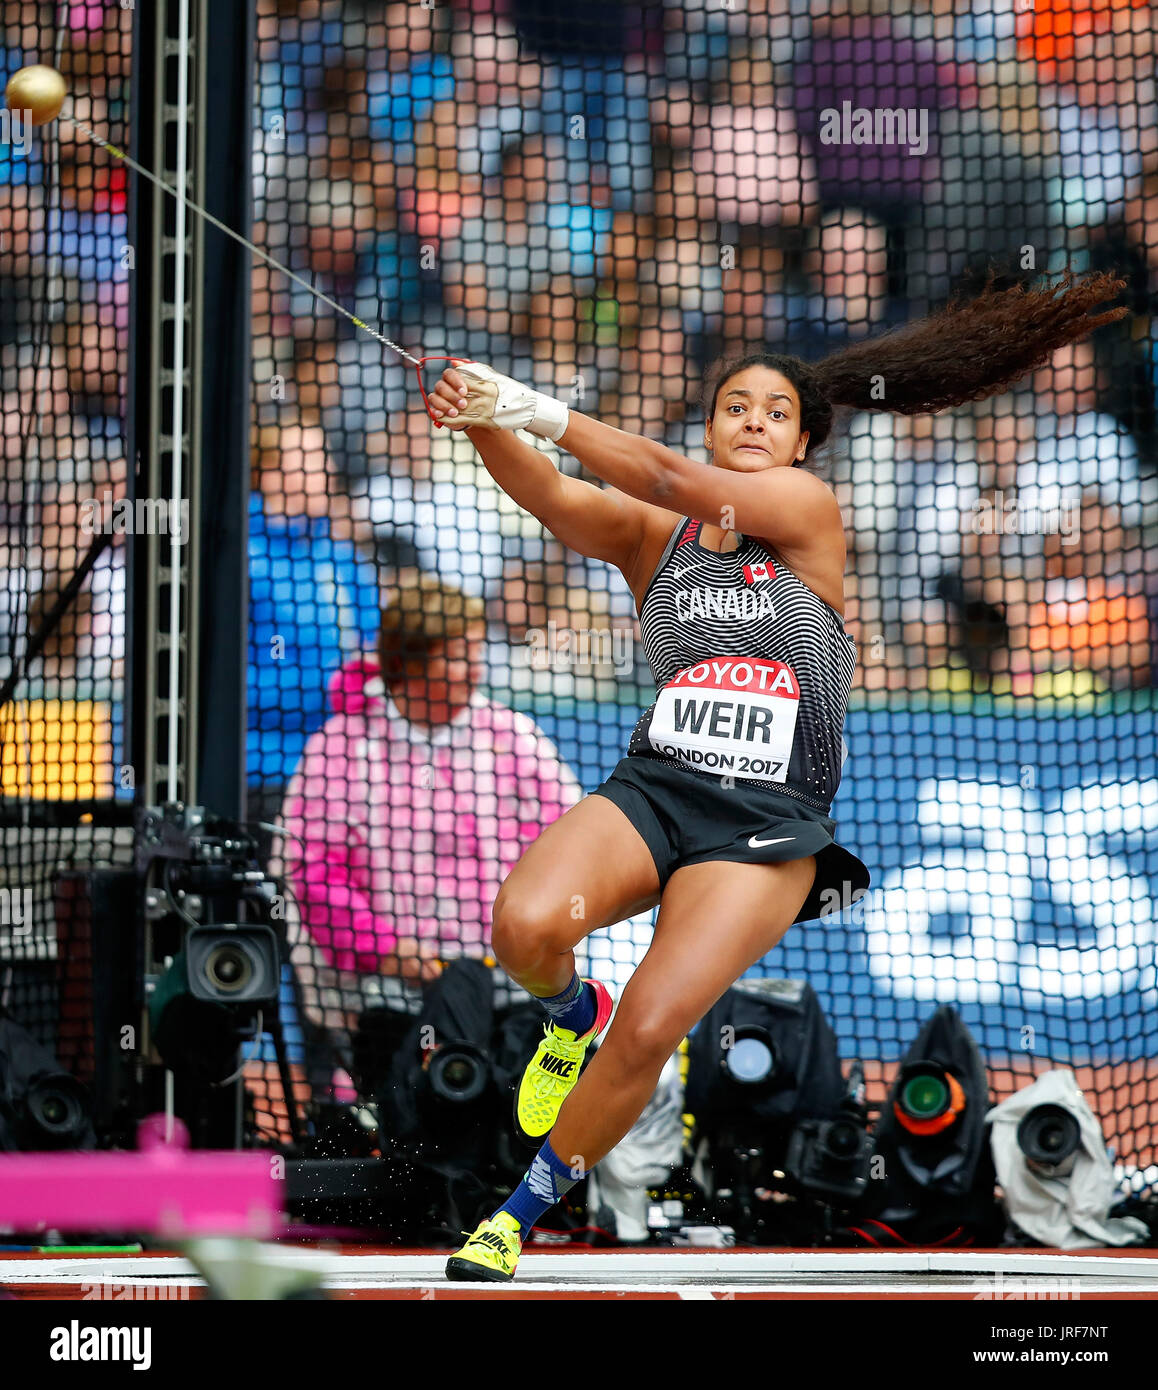 London, Britain. 5th Aug, 2017. Jillian Weir of Canada competes during Women's  Hammer Throw Qualification on Day 2 of the 2017 IAAF World Championships at  London Stadium in London, Britain, on Aug.